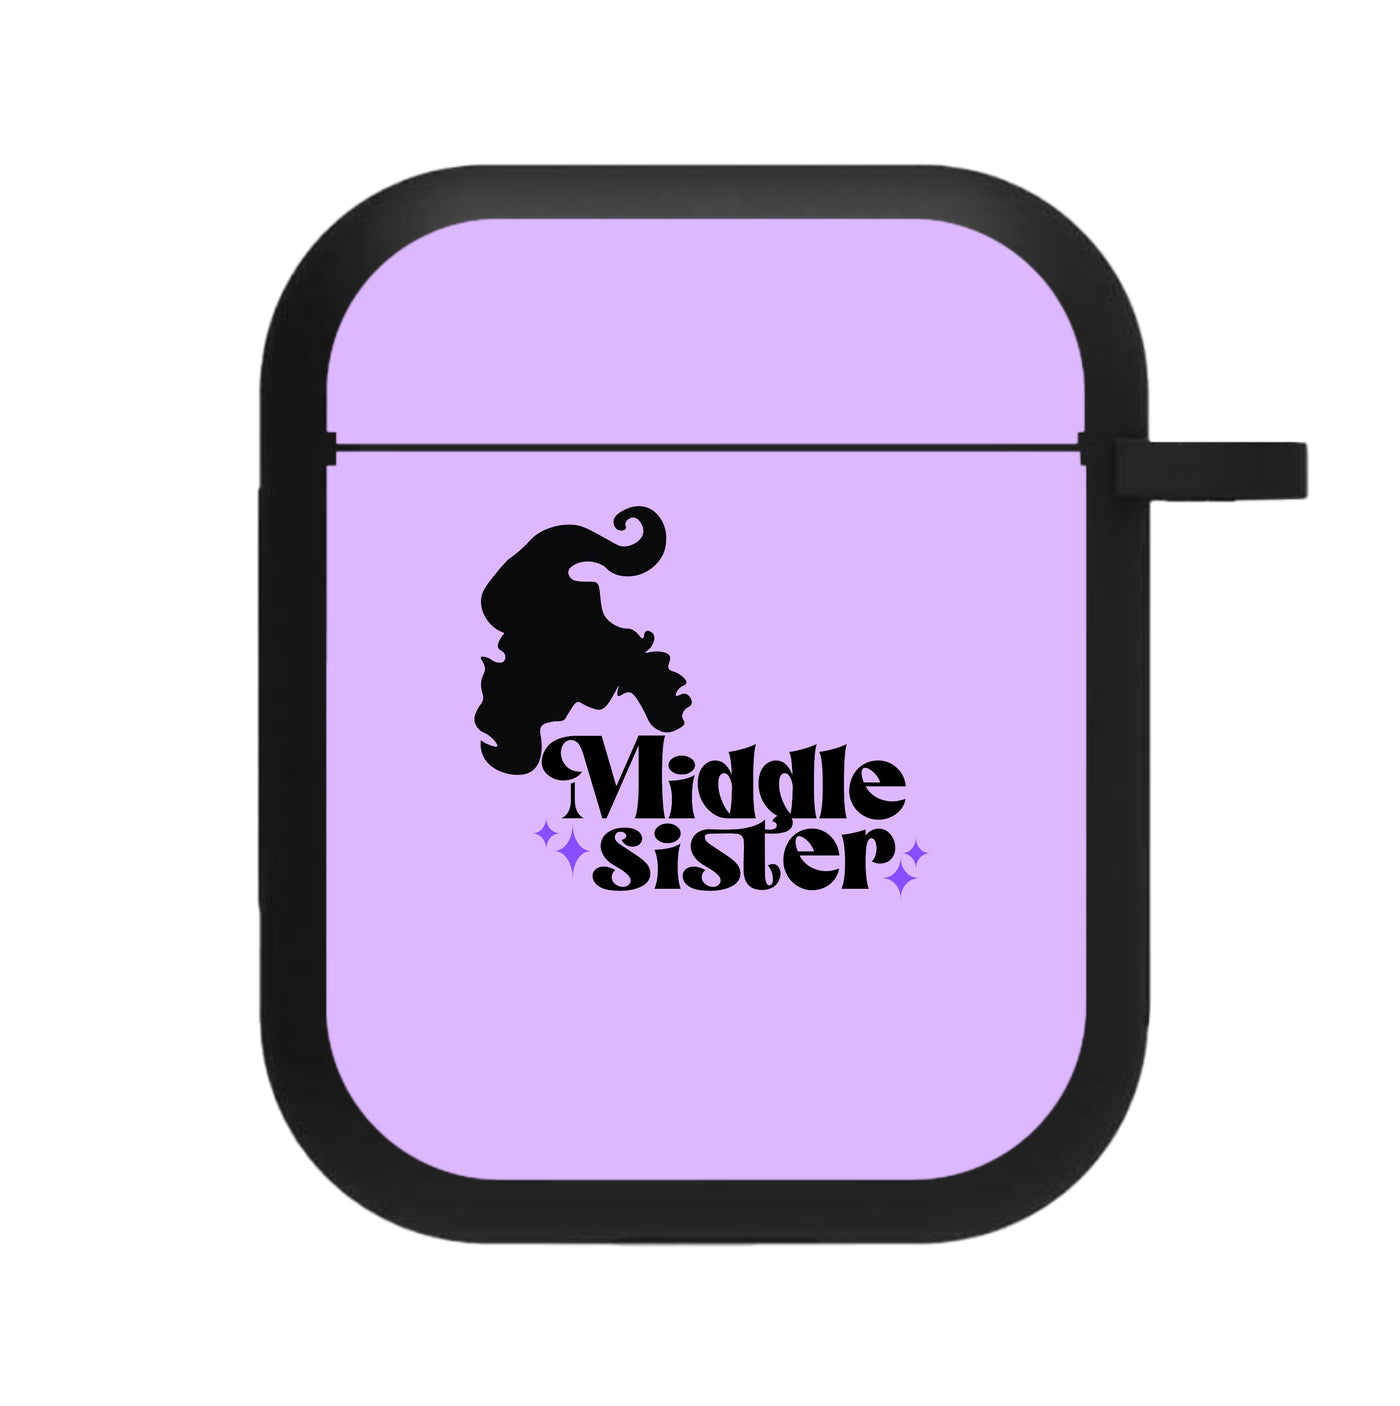 Middle Sister - Hocus Pocus AirPods Case